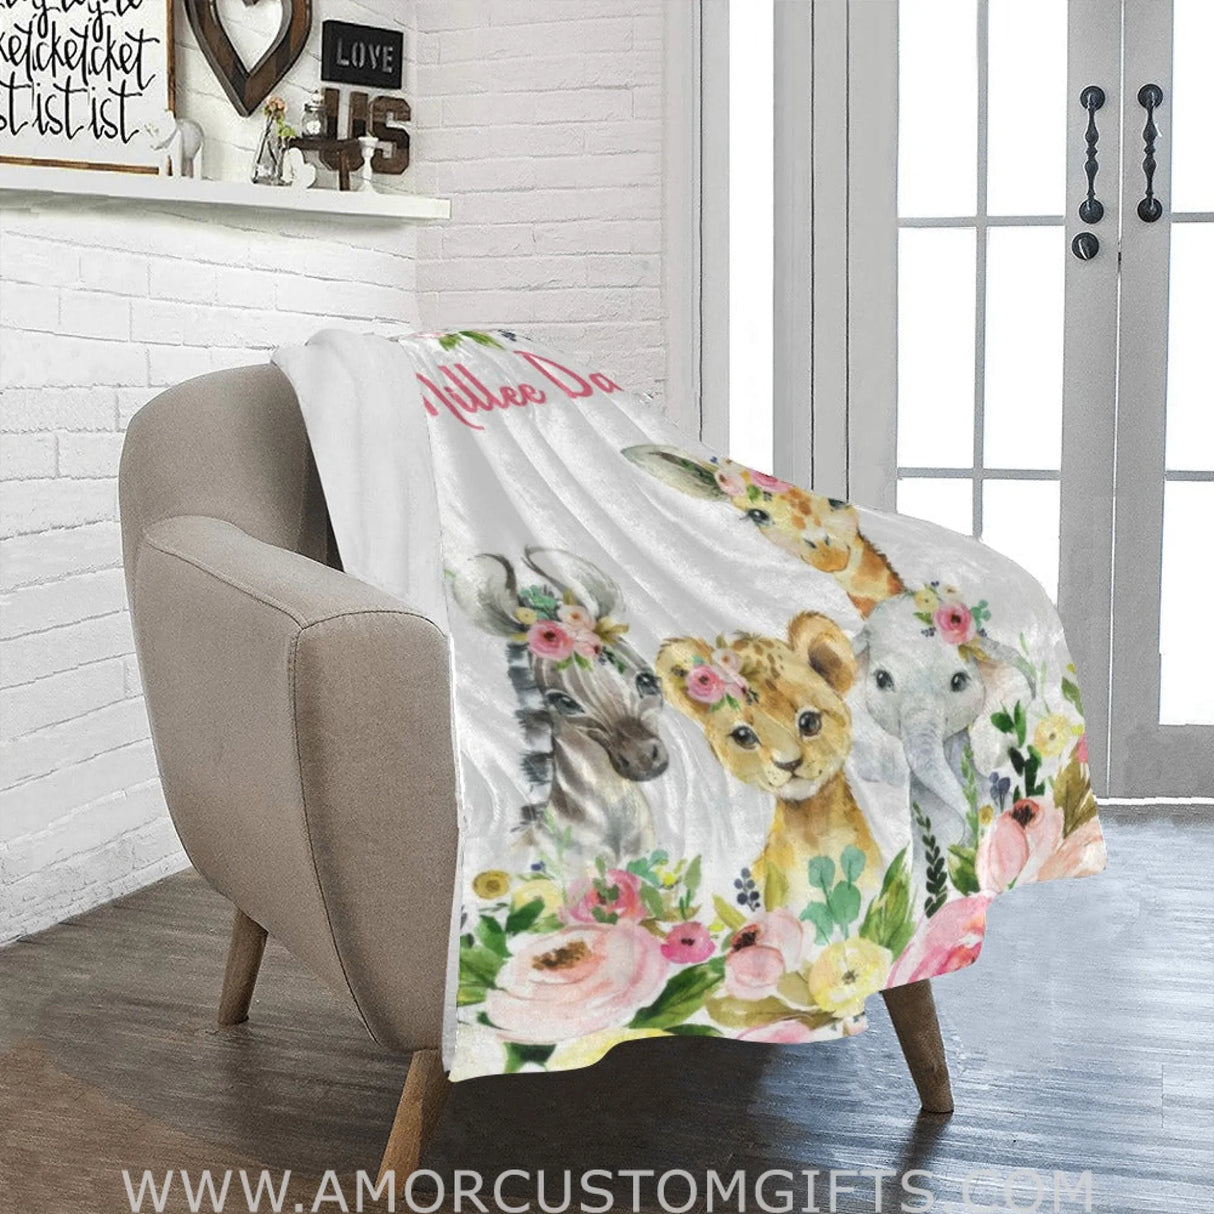 Usa Made Animals Floral Girl Name Blanket Blush Pink Flowers Personalized Safari Jungle Baby